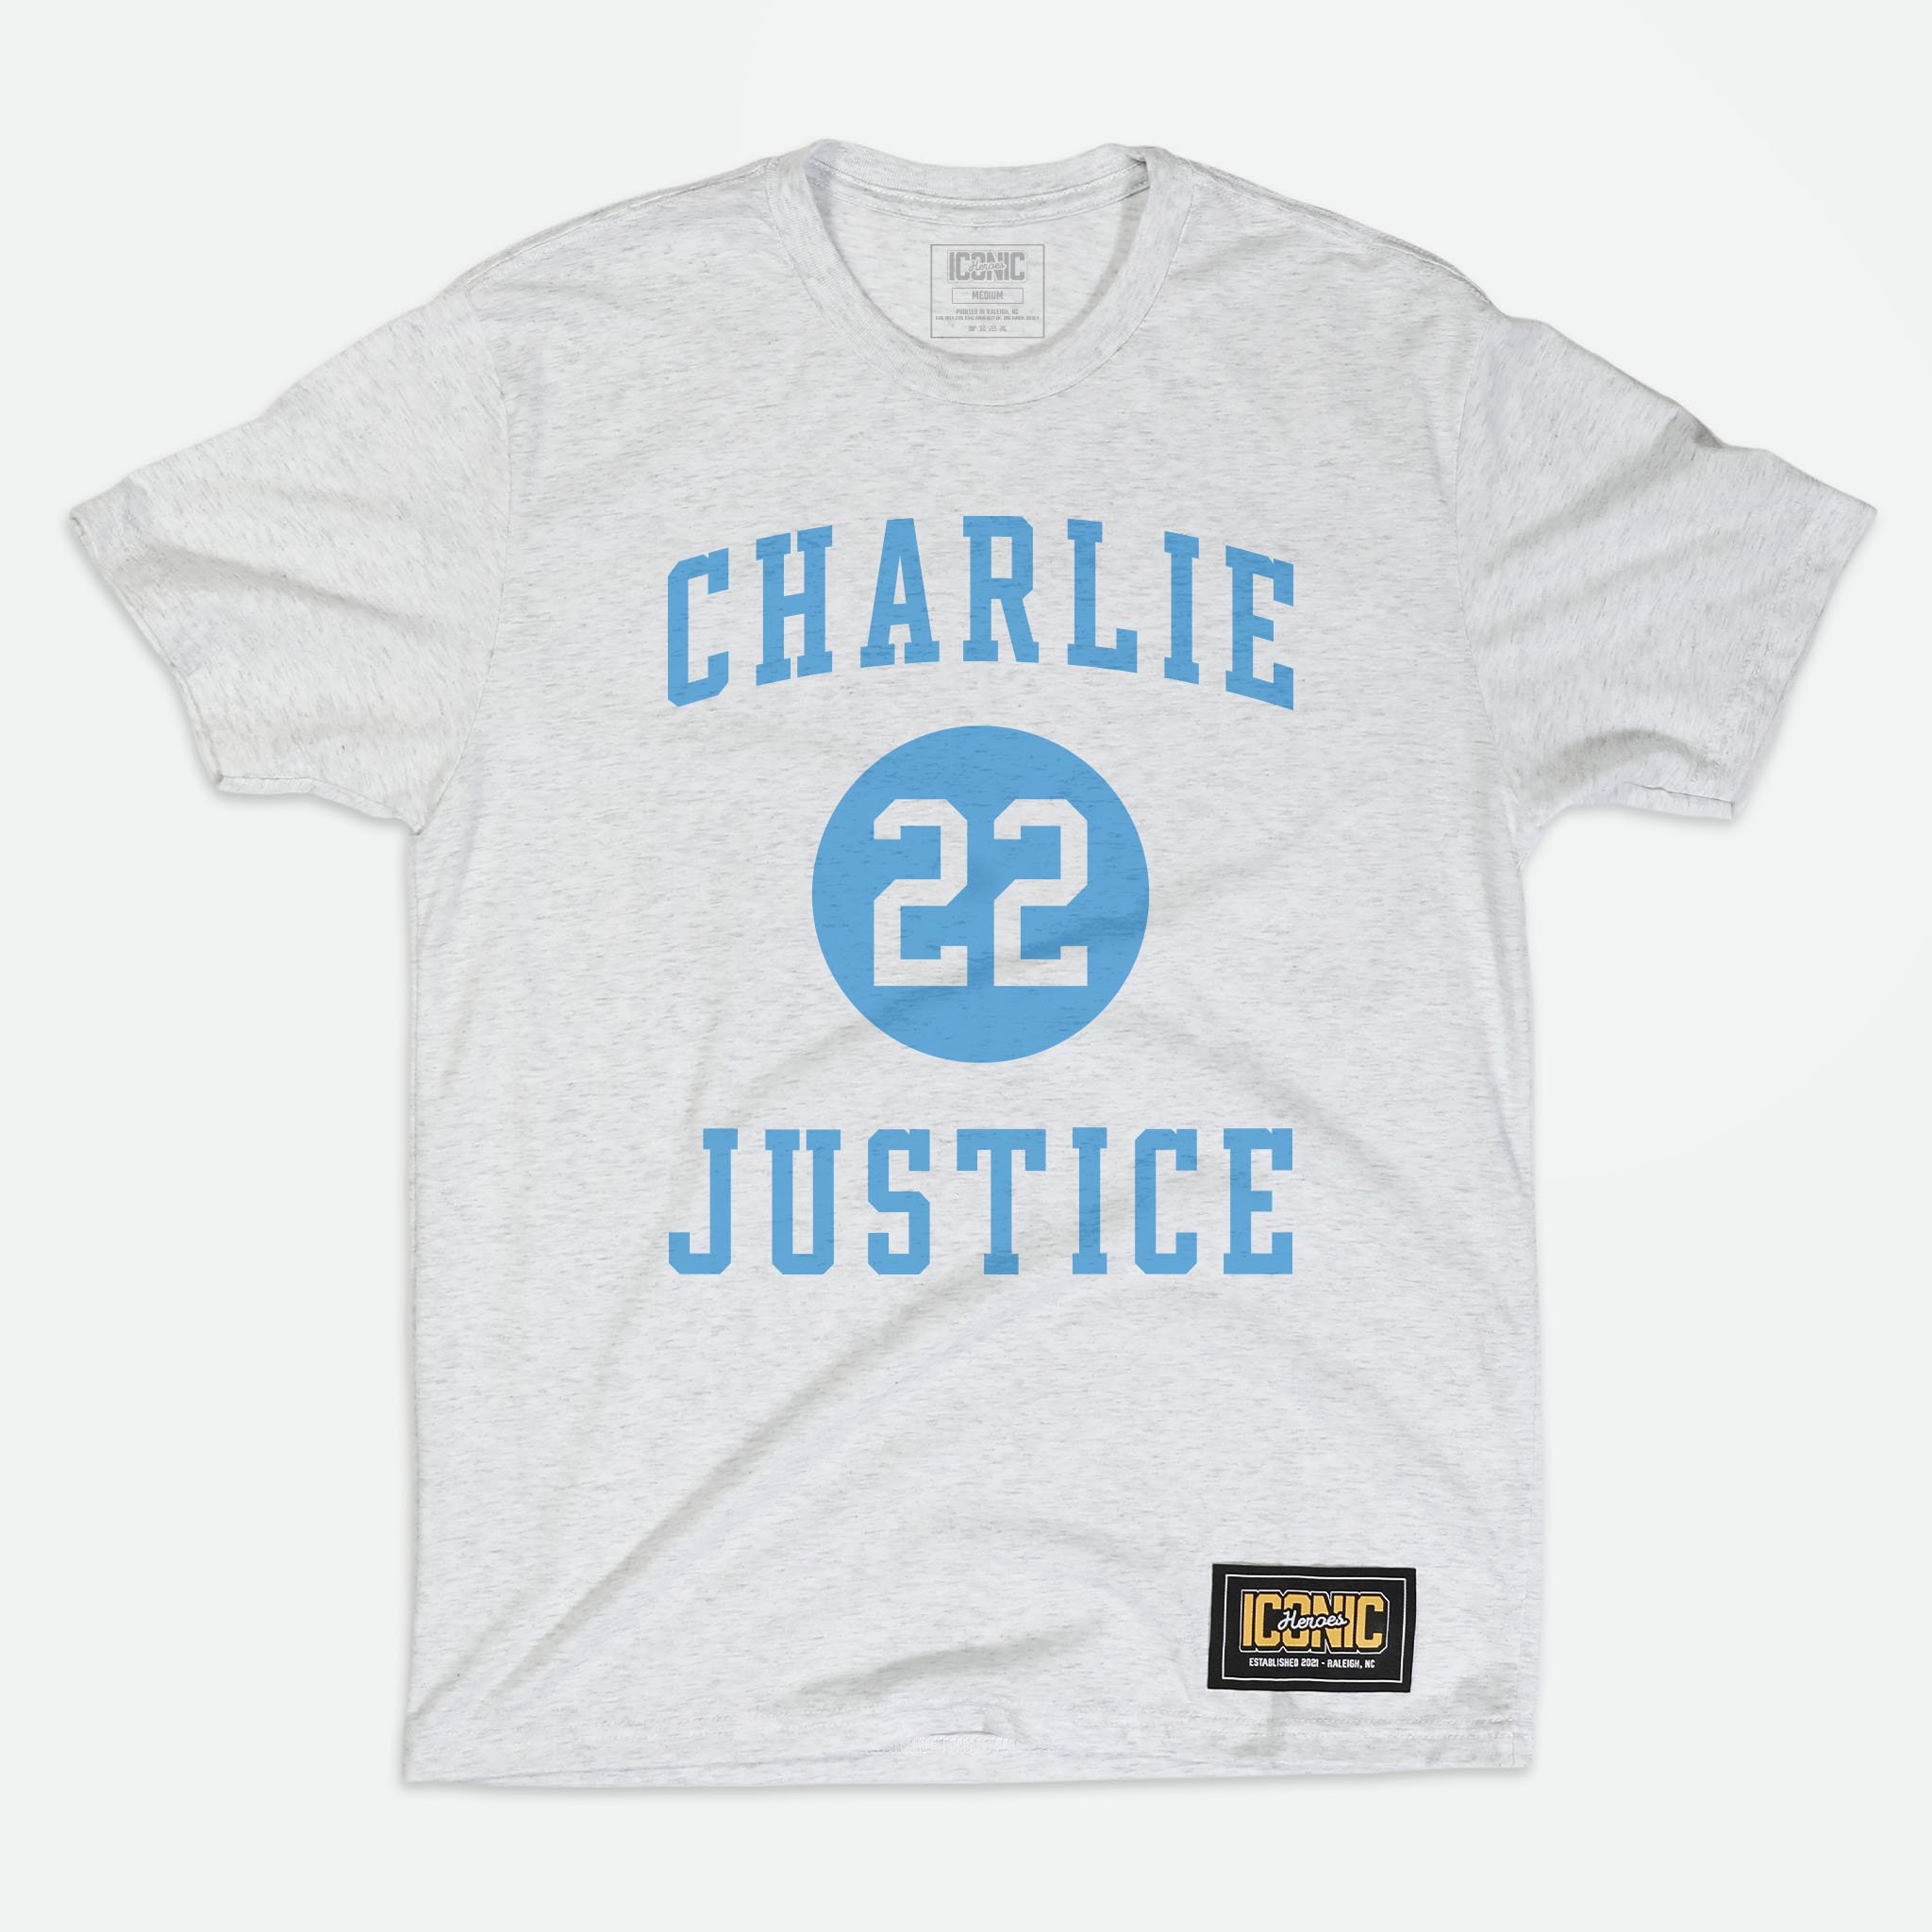 McLean-Roberts-Charlie-Justice-Signature-White-1x1-6101-Heather-White-Product-Web.jpg